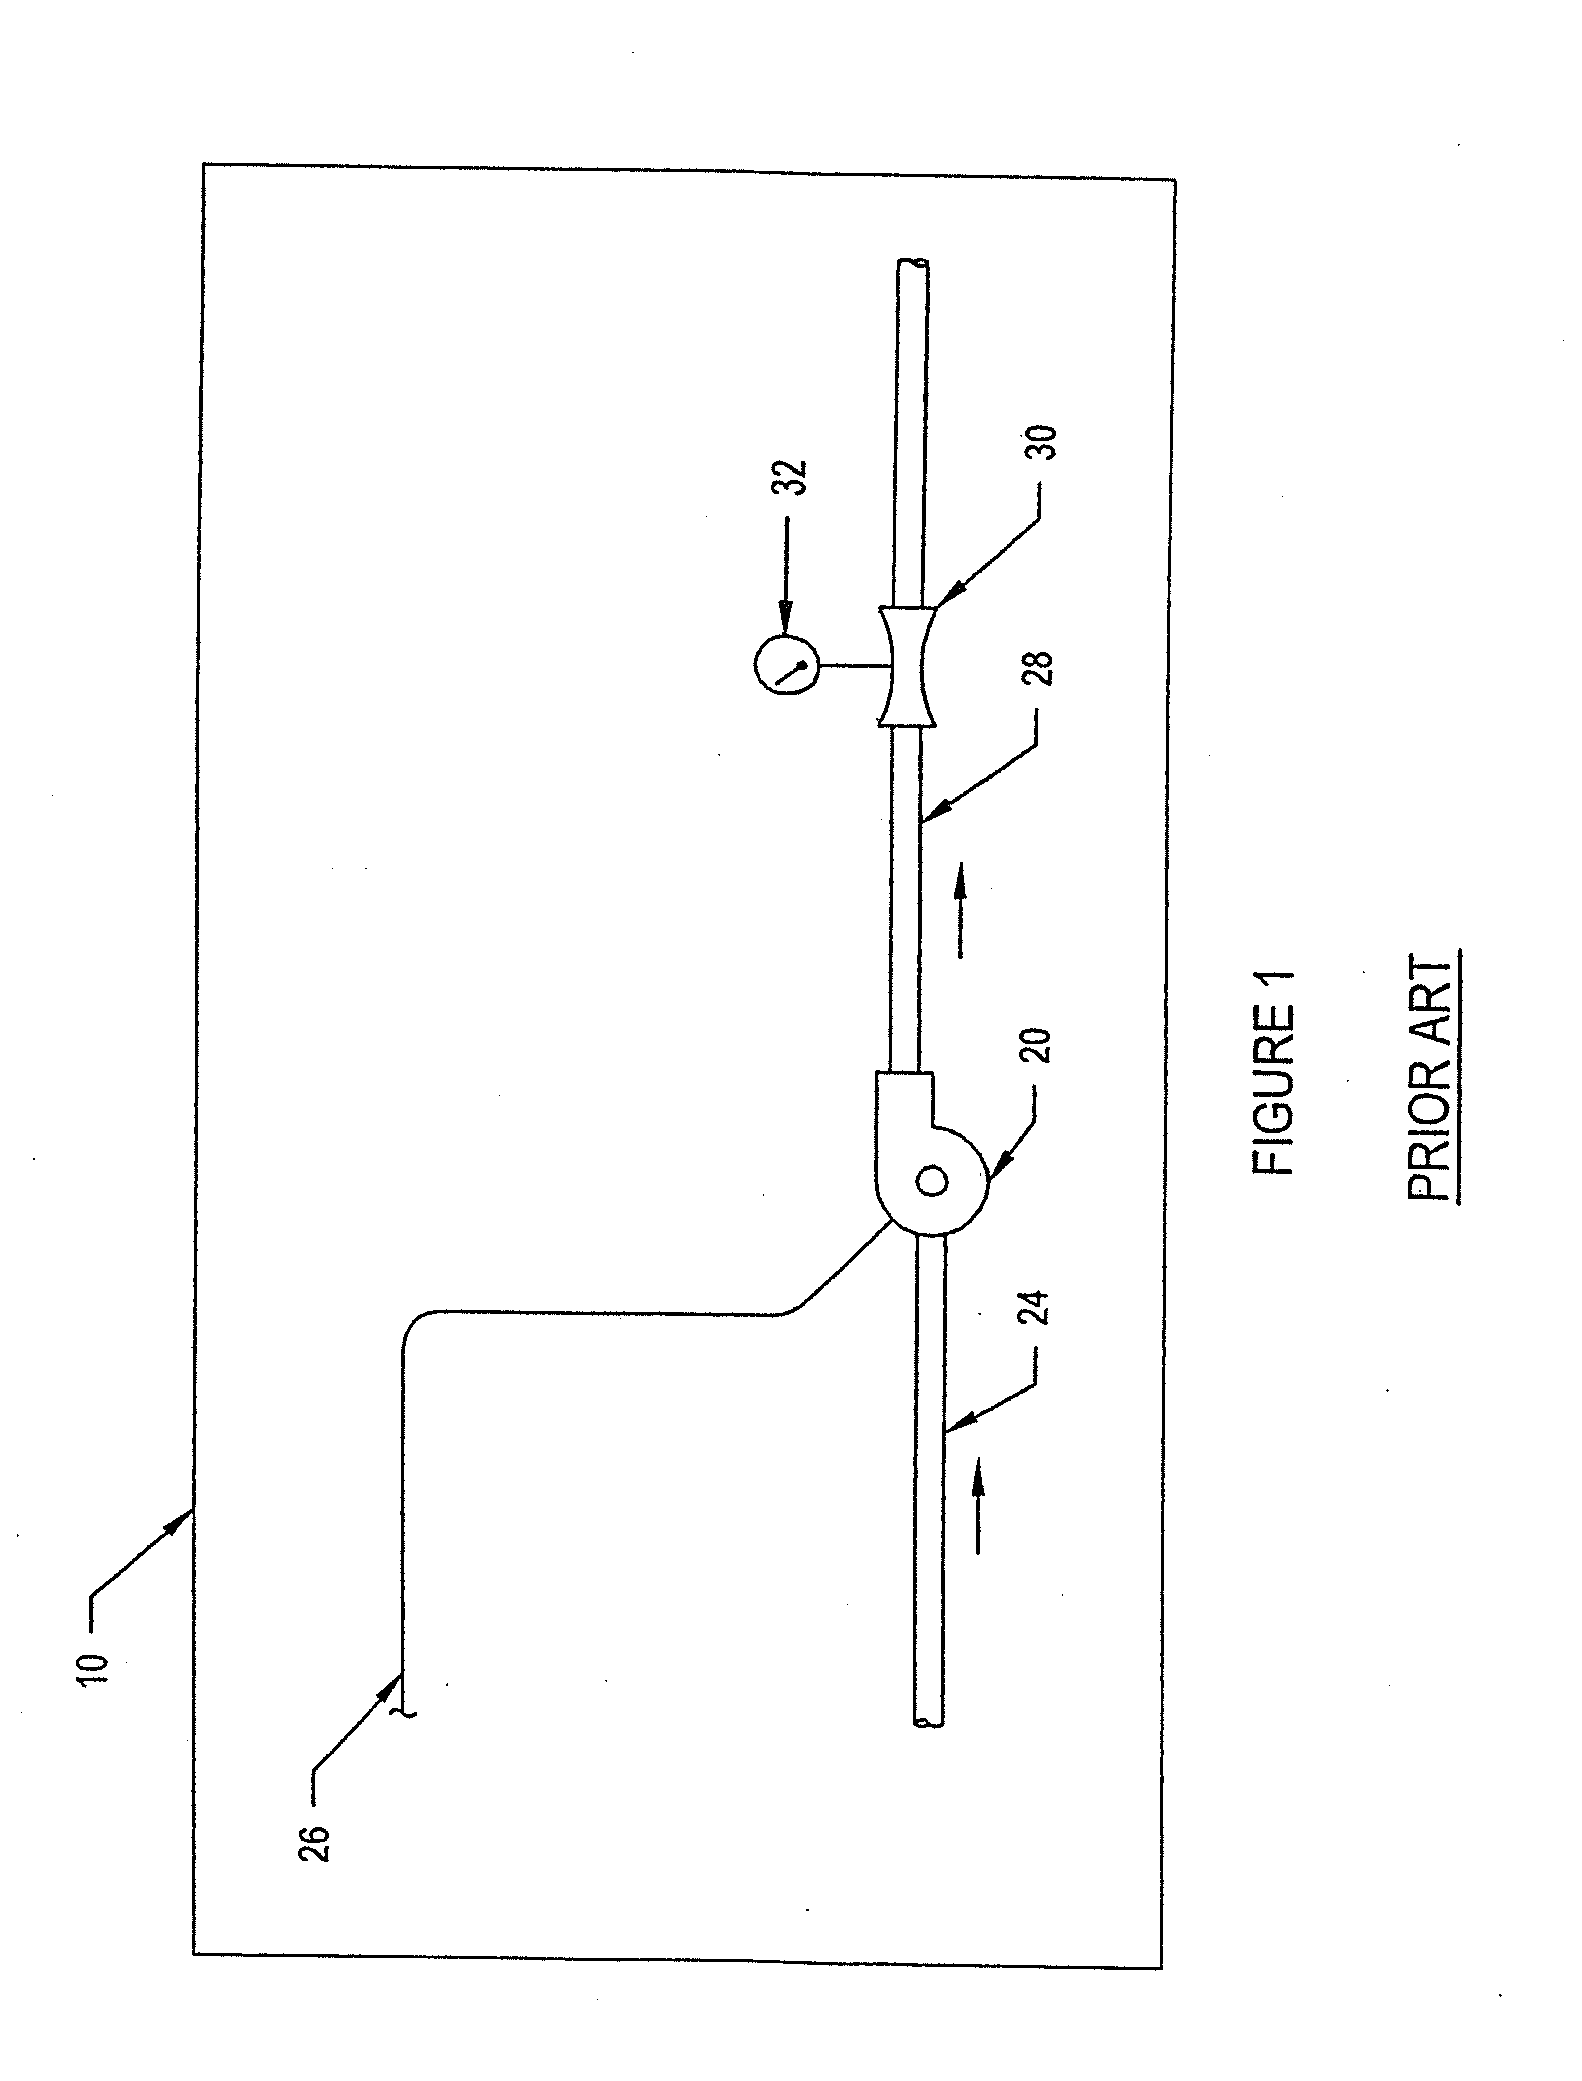 On-line pump efficiency determining system and related method for determining pump efficiency